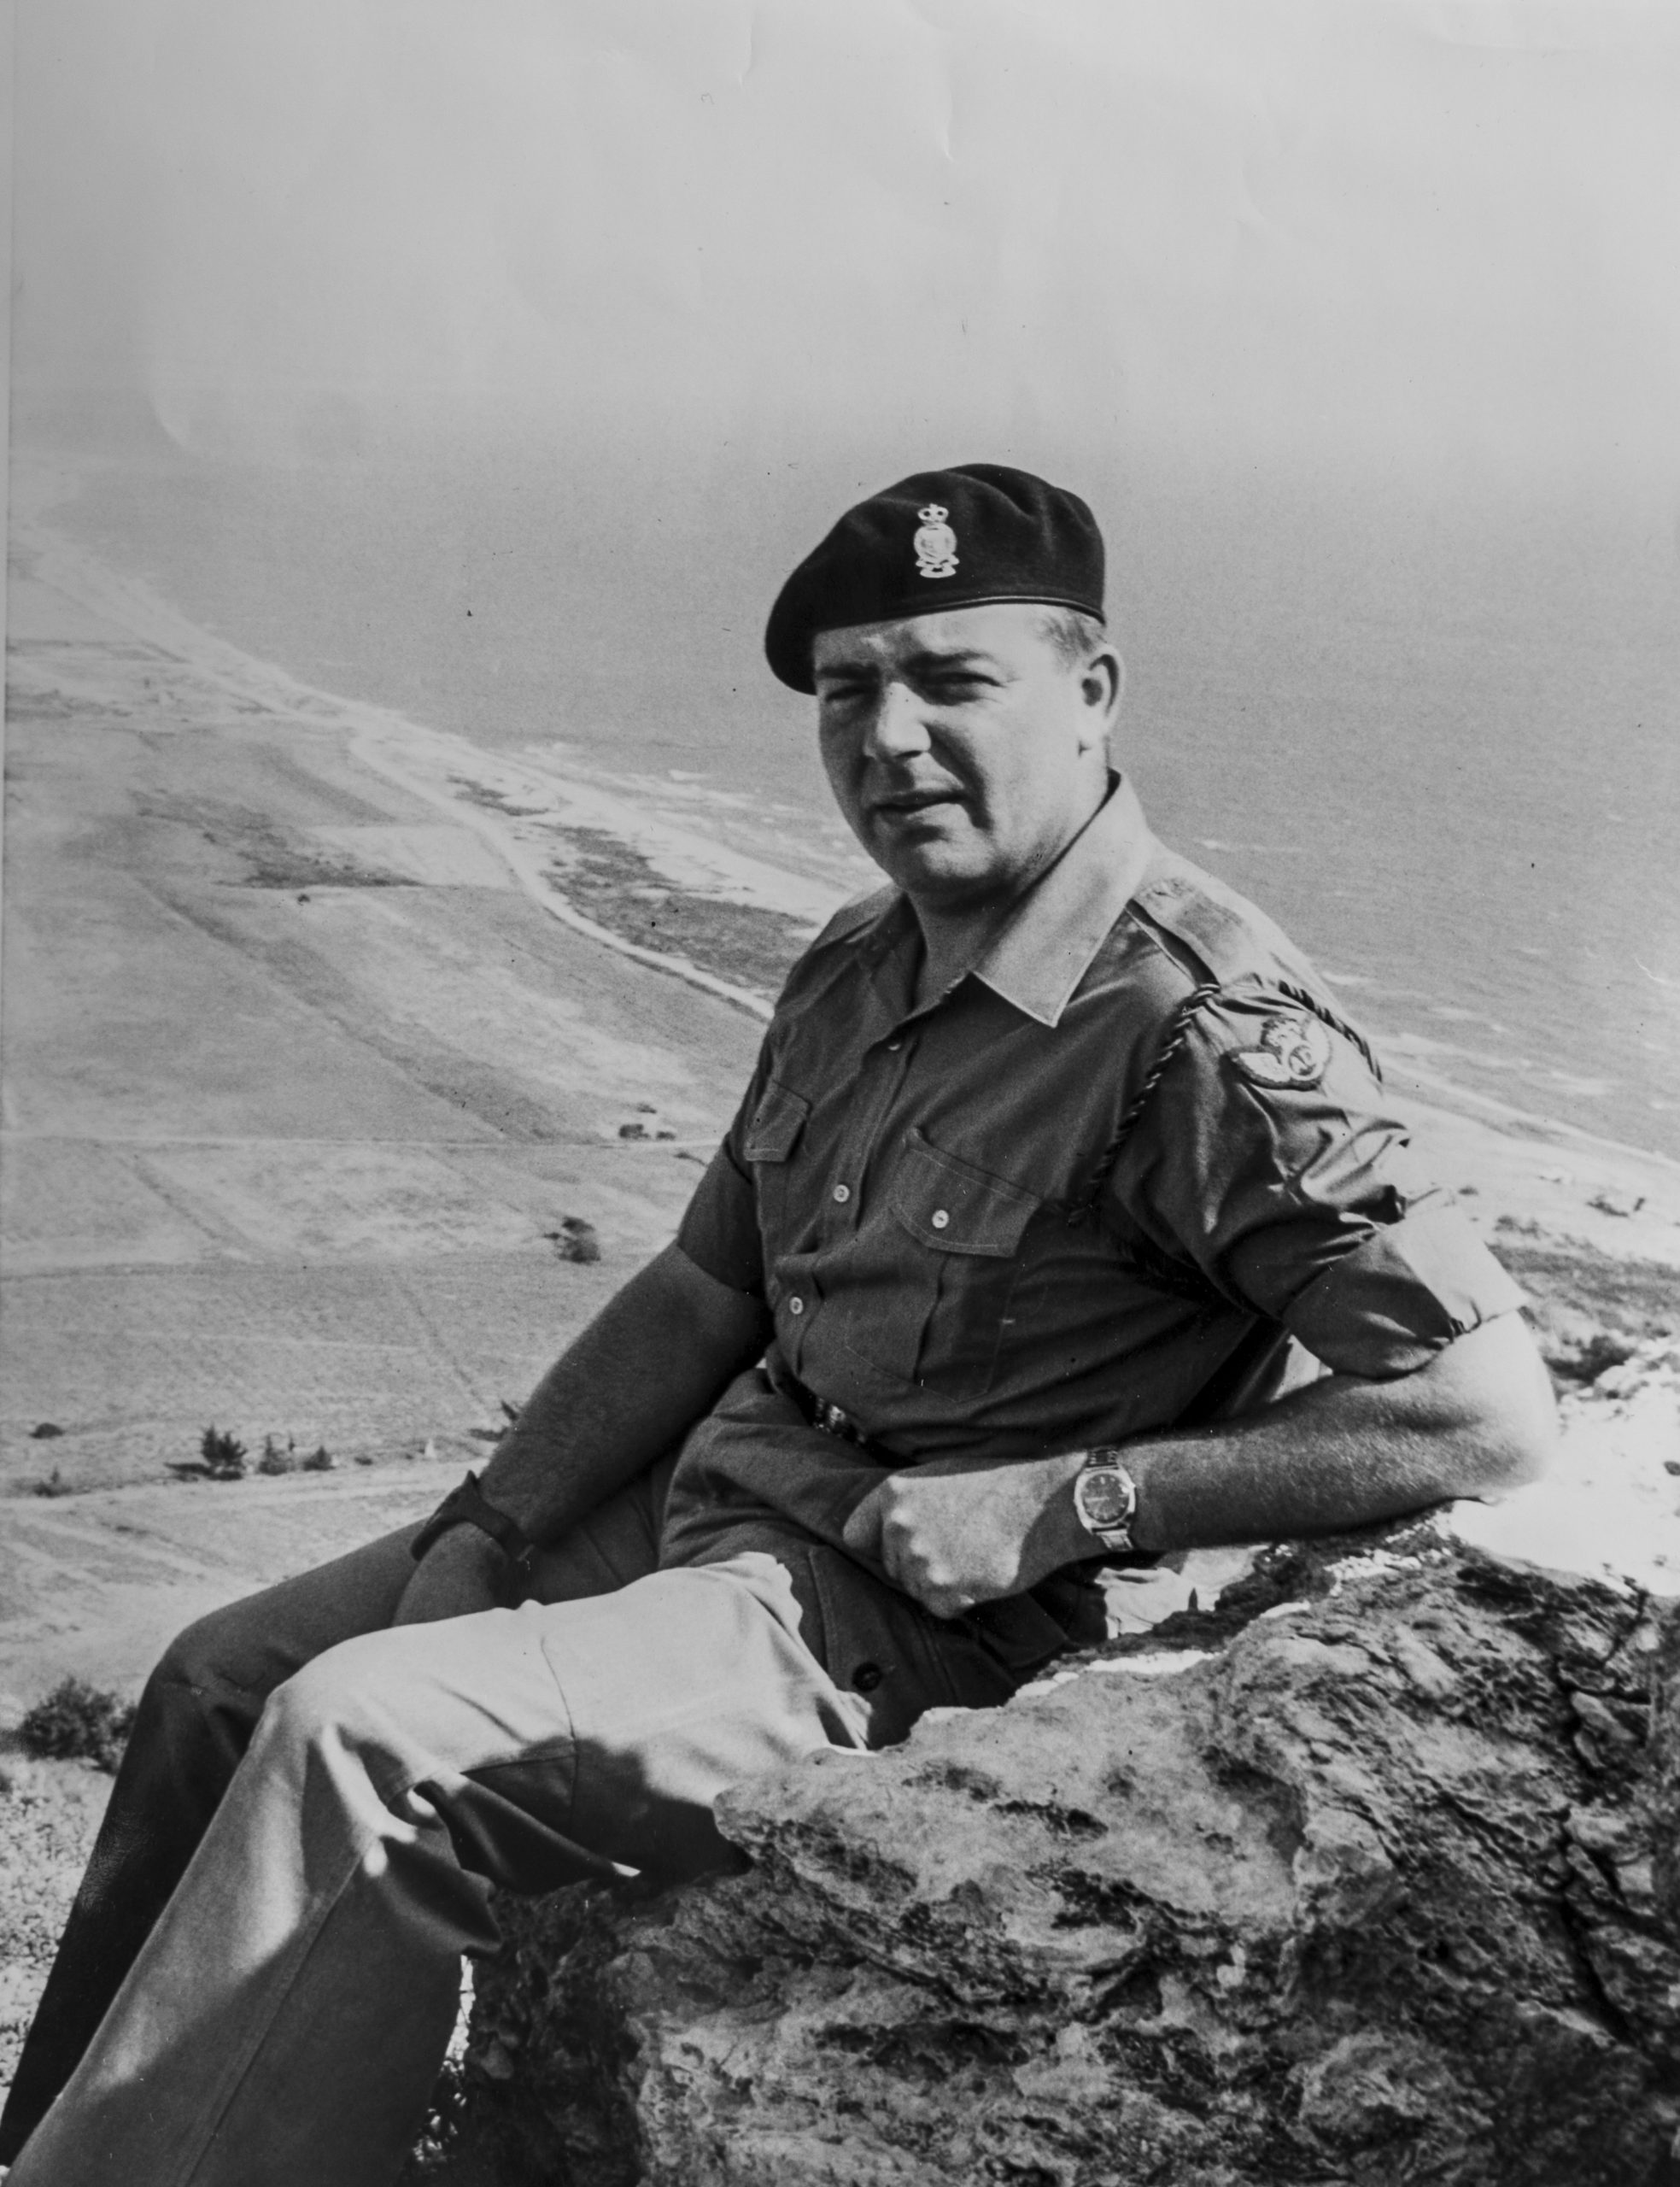 Frank Durrans in Cyprus in 1970 during his military career